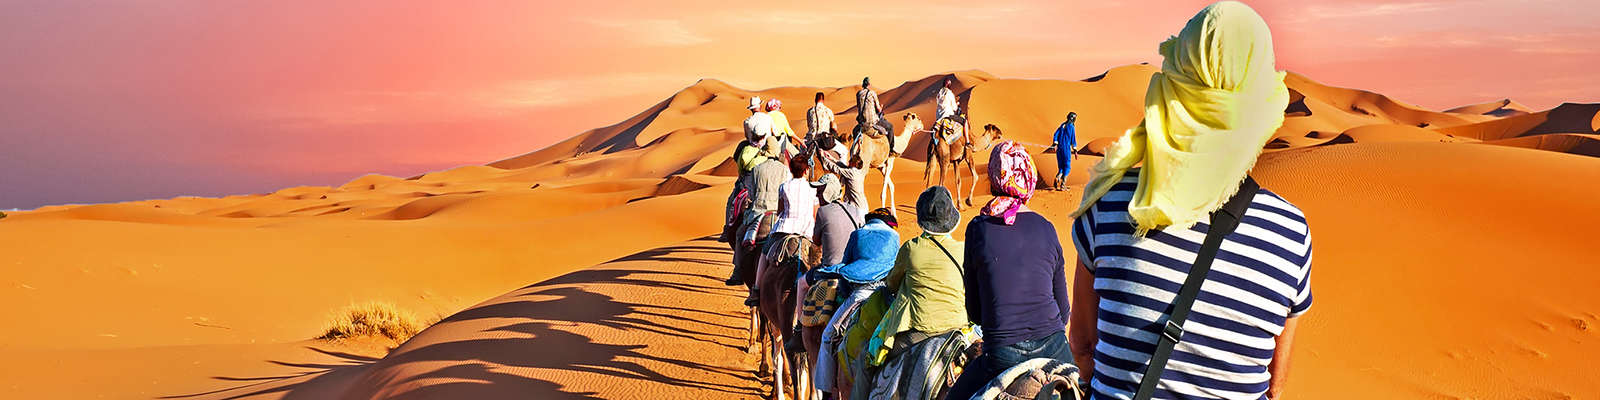 Ride a camel and explore the Arab desert